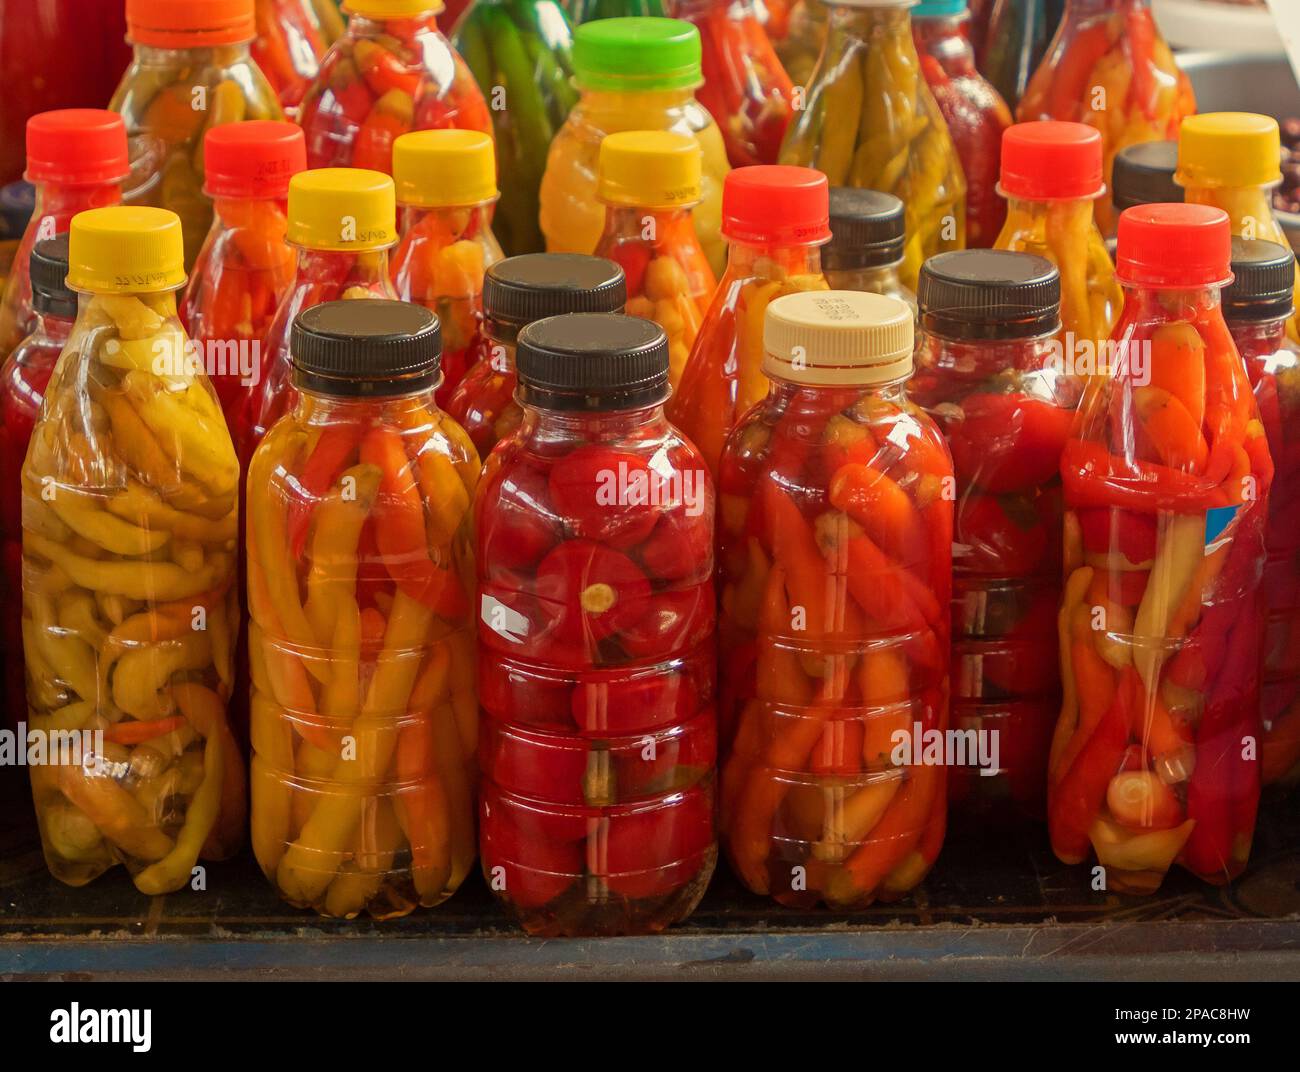 Preserved organic pickled vegetables stored in plastic bottles and glass jars sold on market stall outdoors Stock Photo